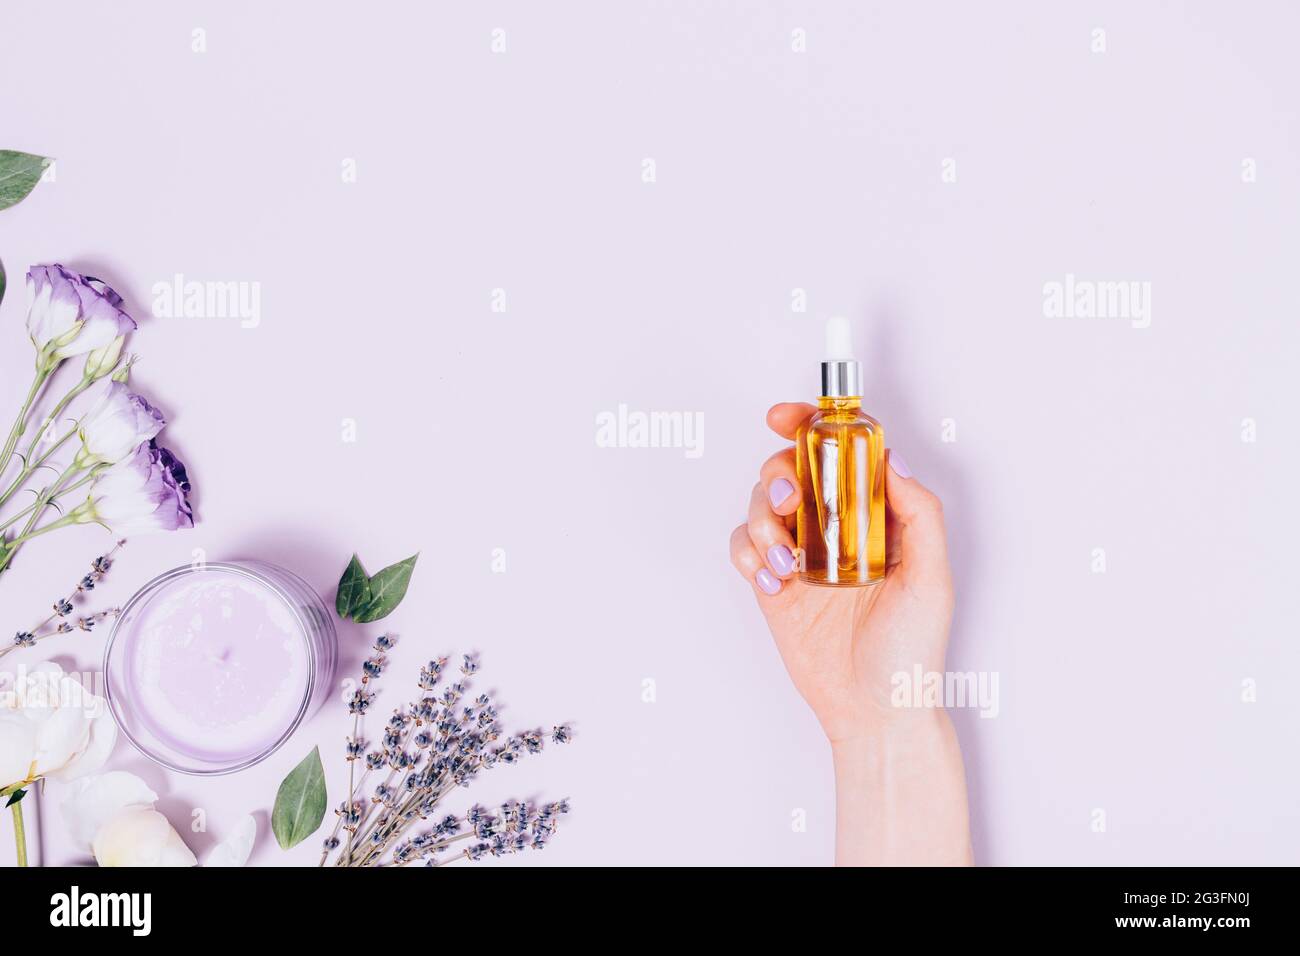 Female hand holding bottle of cosmetic oil next to scented candle, lavender, white peony and lisianthus flowers on light purple background, flat lay. Stock Photo